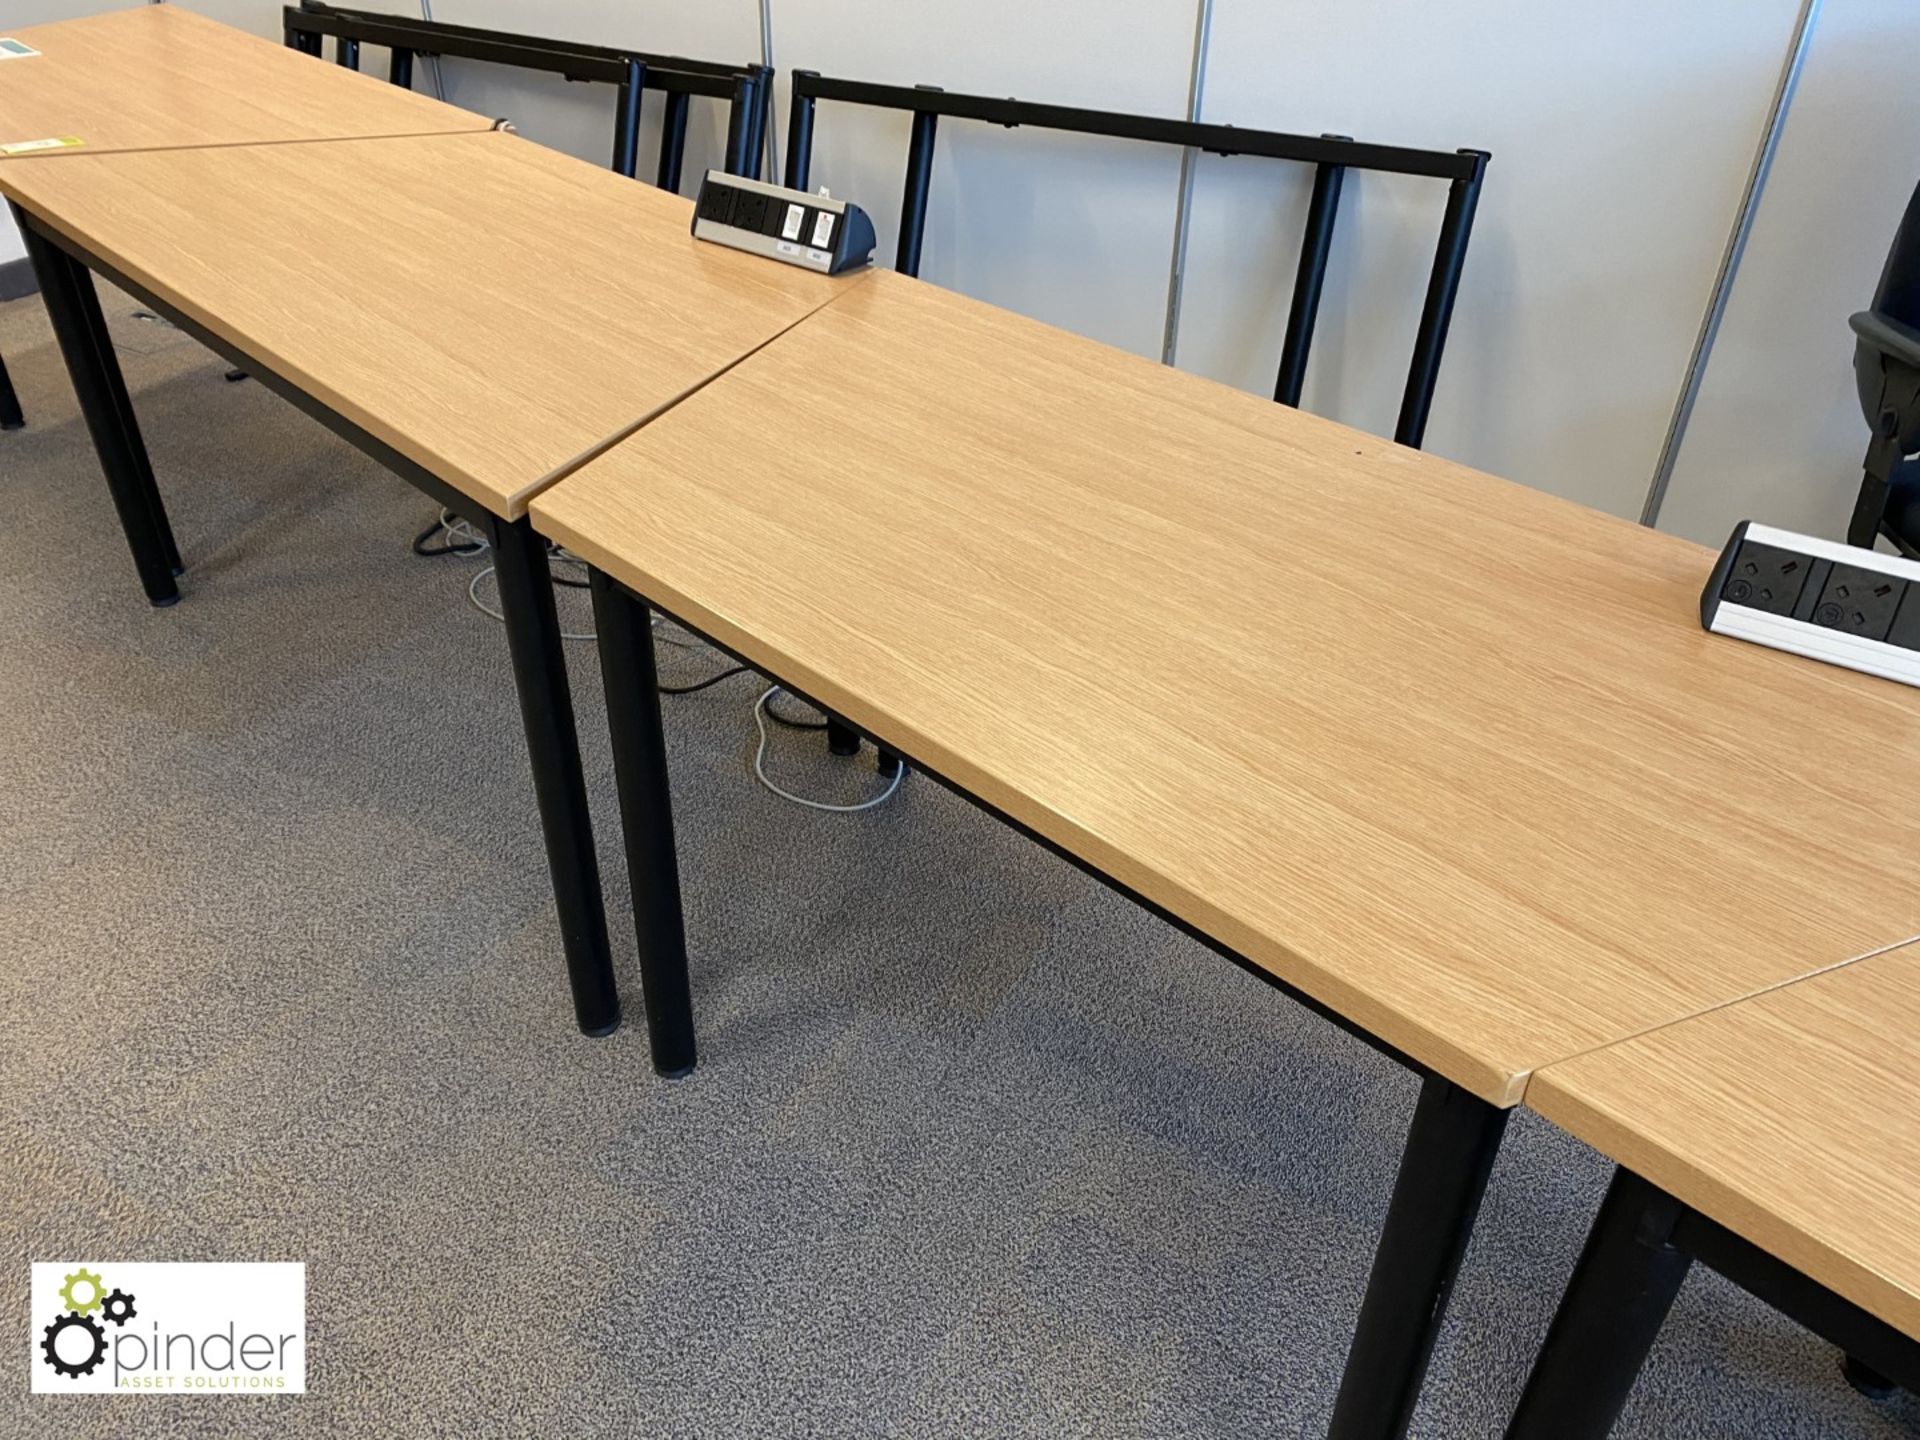 5 oak effect shaped Meeting Tables (located in Coopers Meeting Room on first floor) - Image 4 of 4